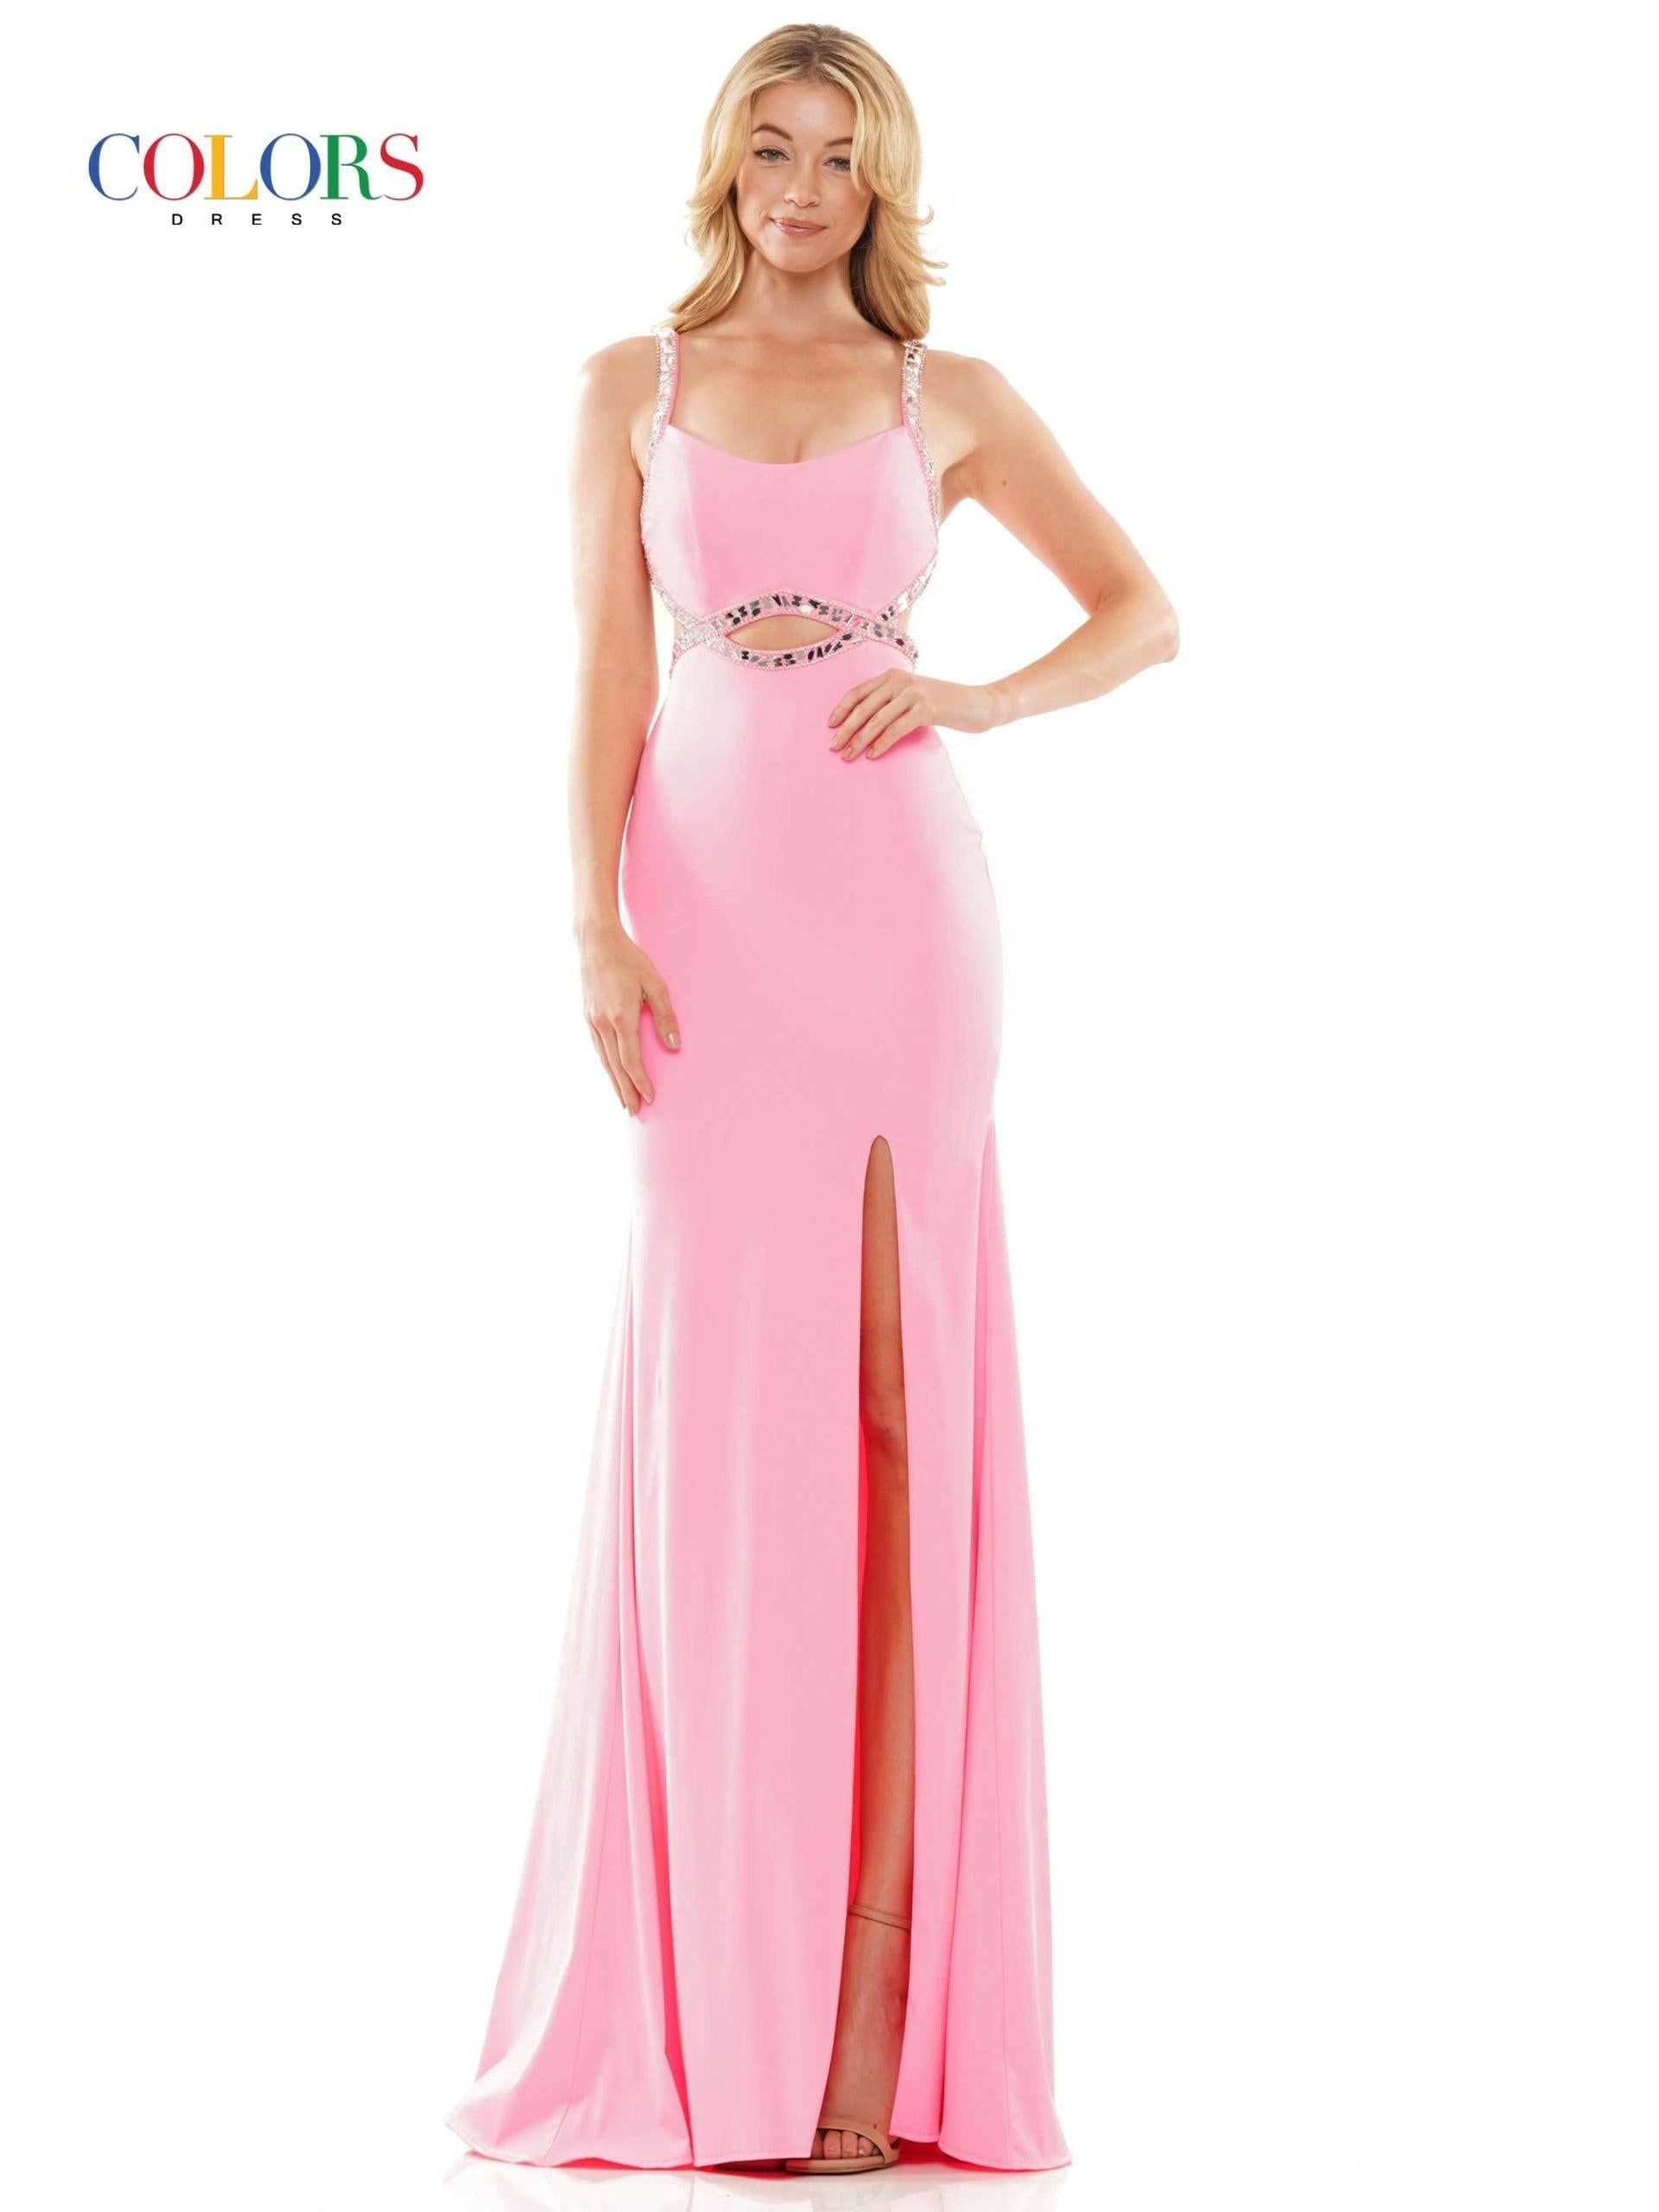 Colors Long Spaghetti Strap Evening Dress 2829 - The Dress Outlet